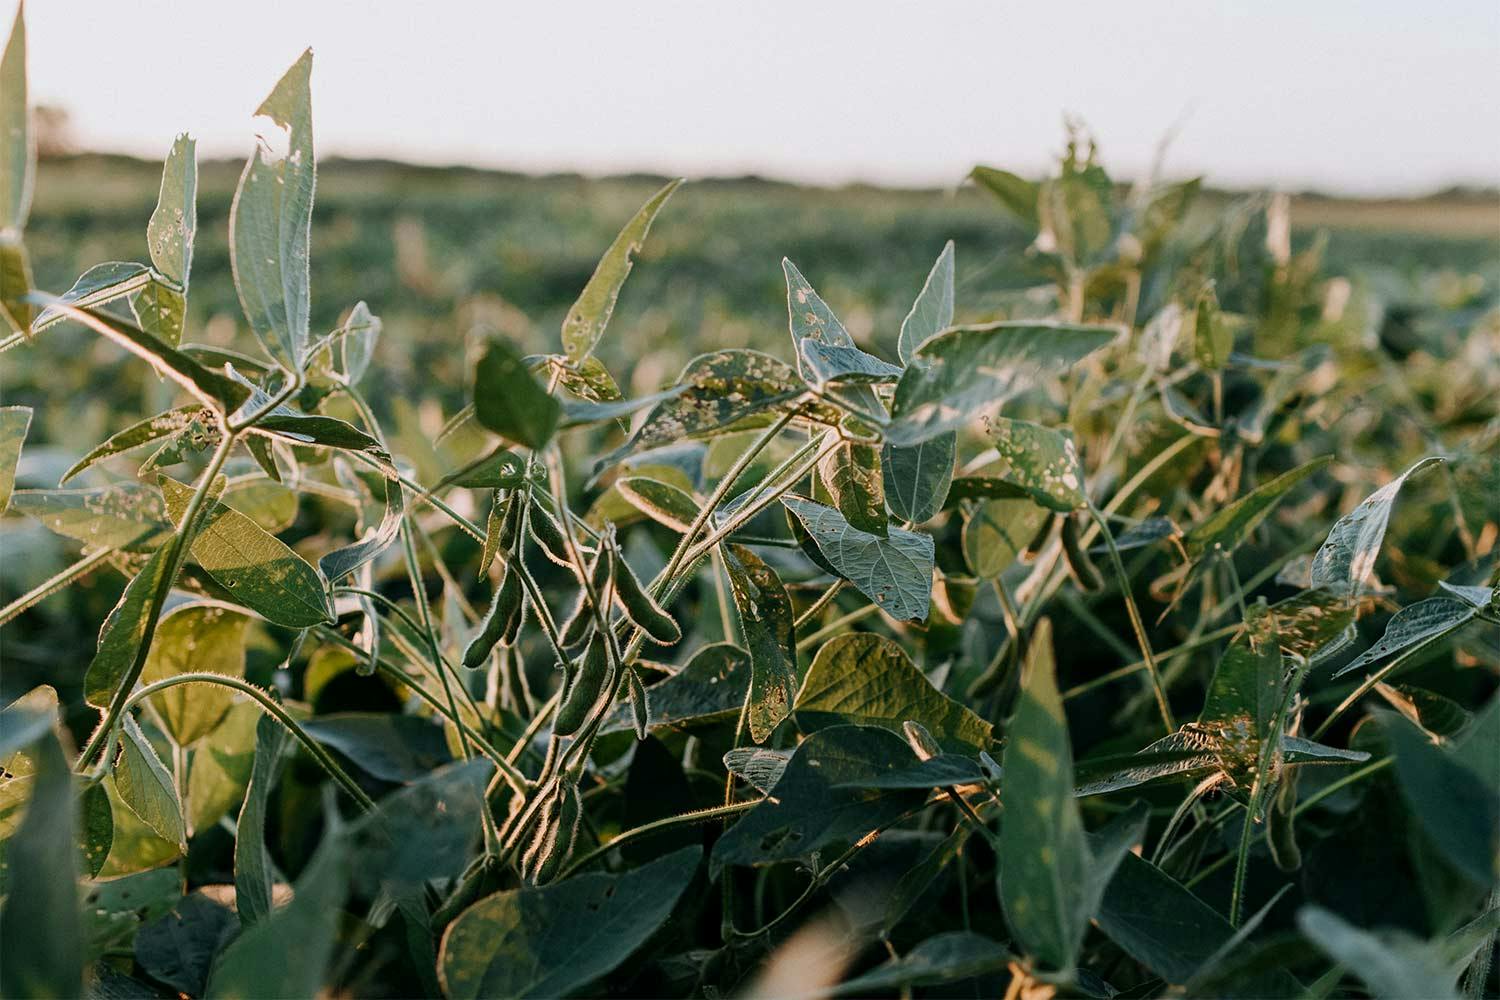 6 soybean pods hang from their leafy stems in a golden sun-lit field.